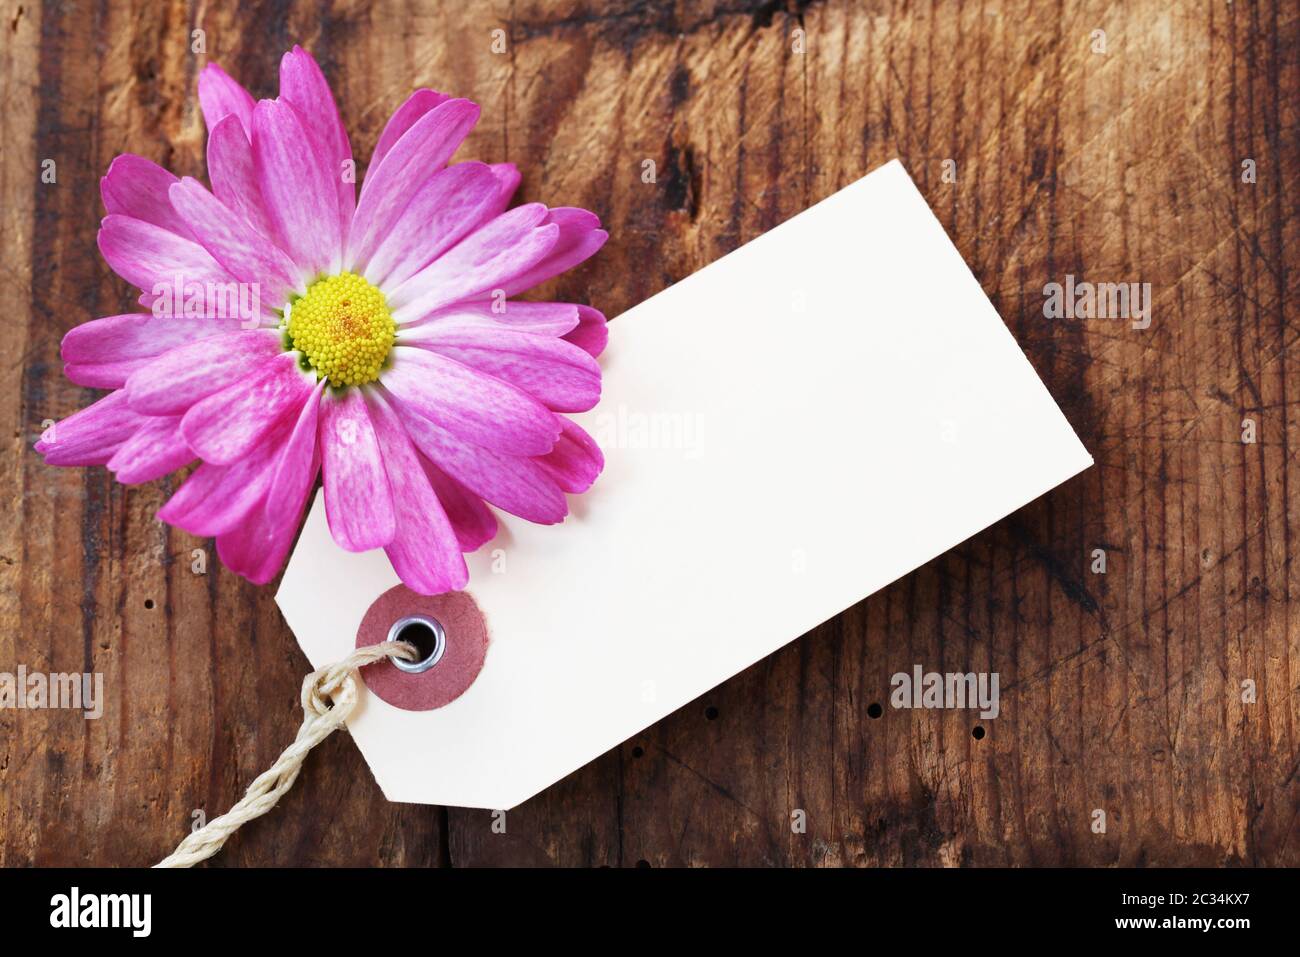 Pink Marguerite With A Blank Paper Label On A Wooden Background Stock Photo